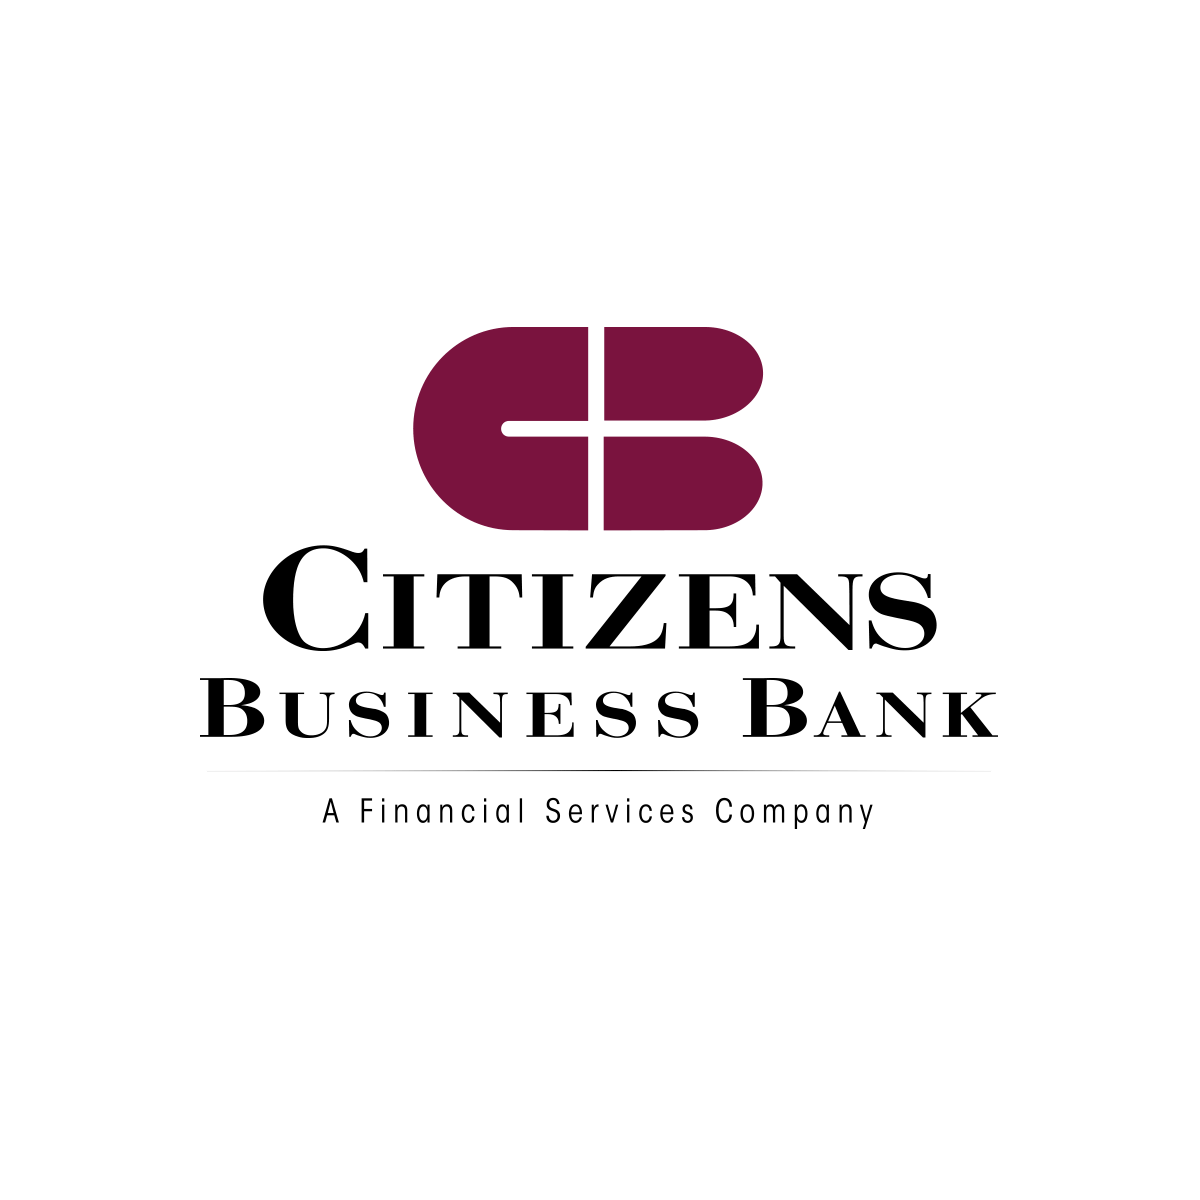 Banking and Financial Logo - Citizens Business Bank - A Financial Services Company